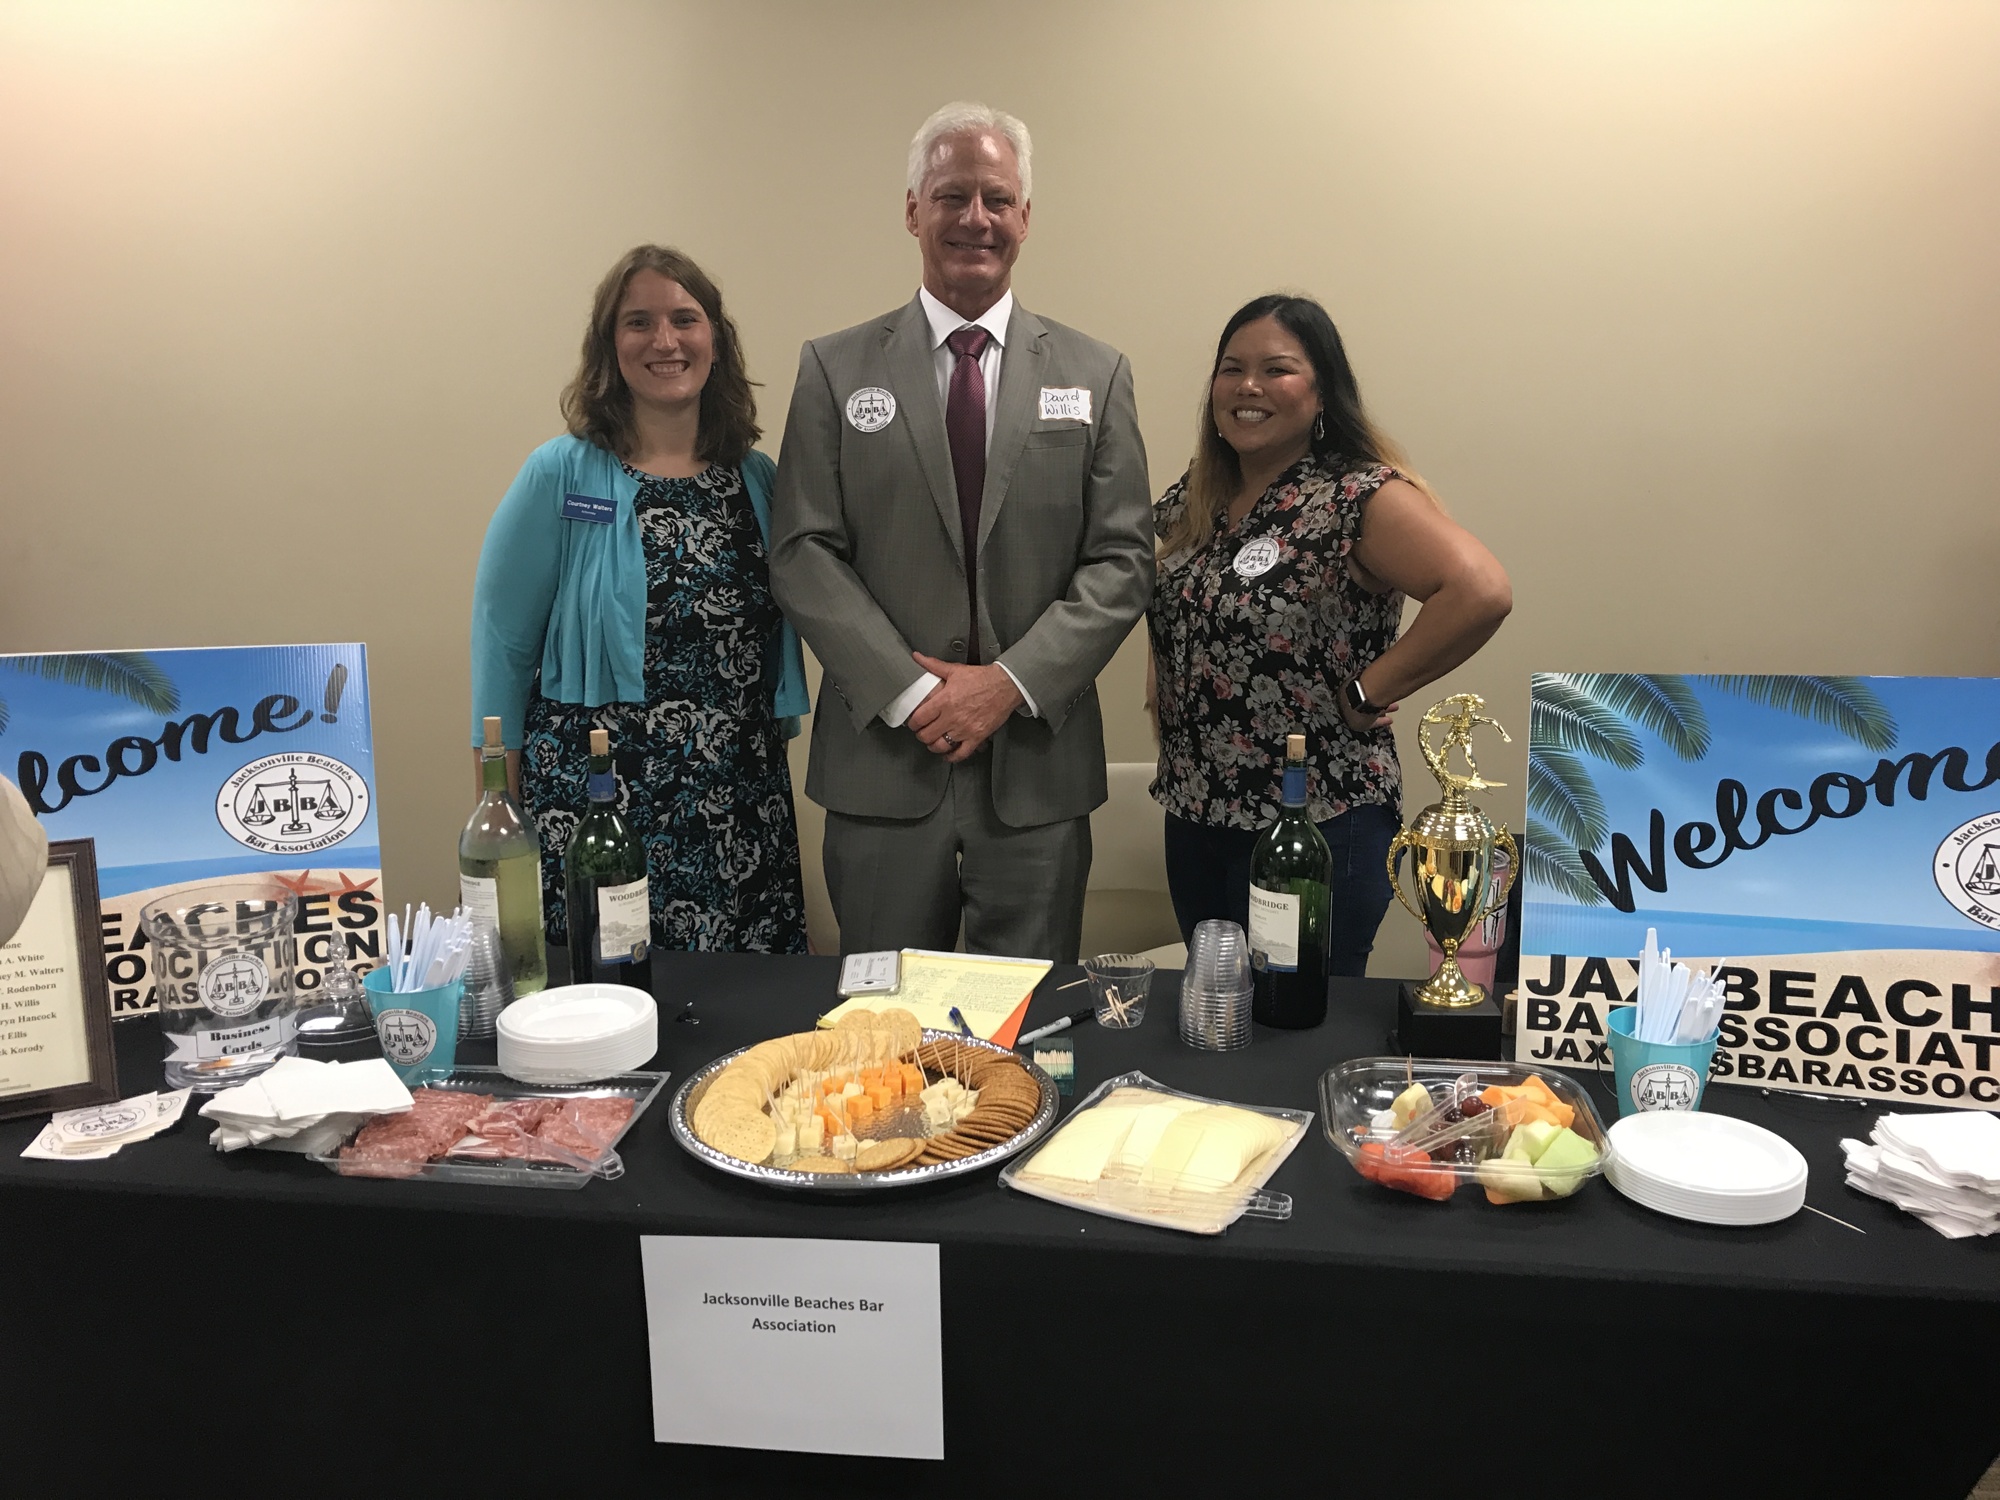 Courtney Waters, David Willis and Rose Hawk put on an impressive spread for the Jacksonville Beaches Bar Association.